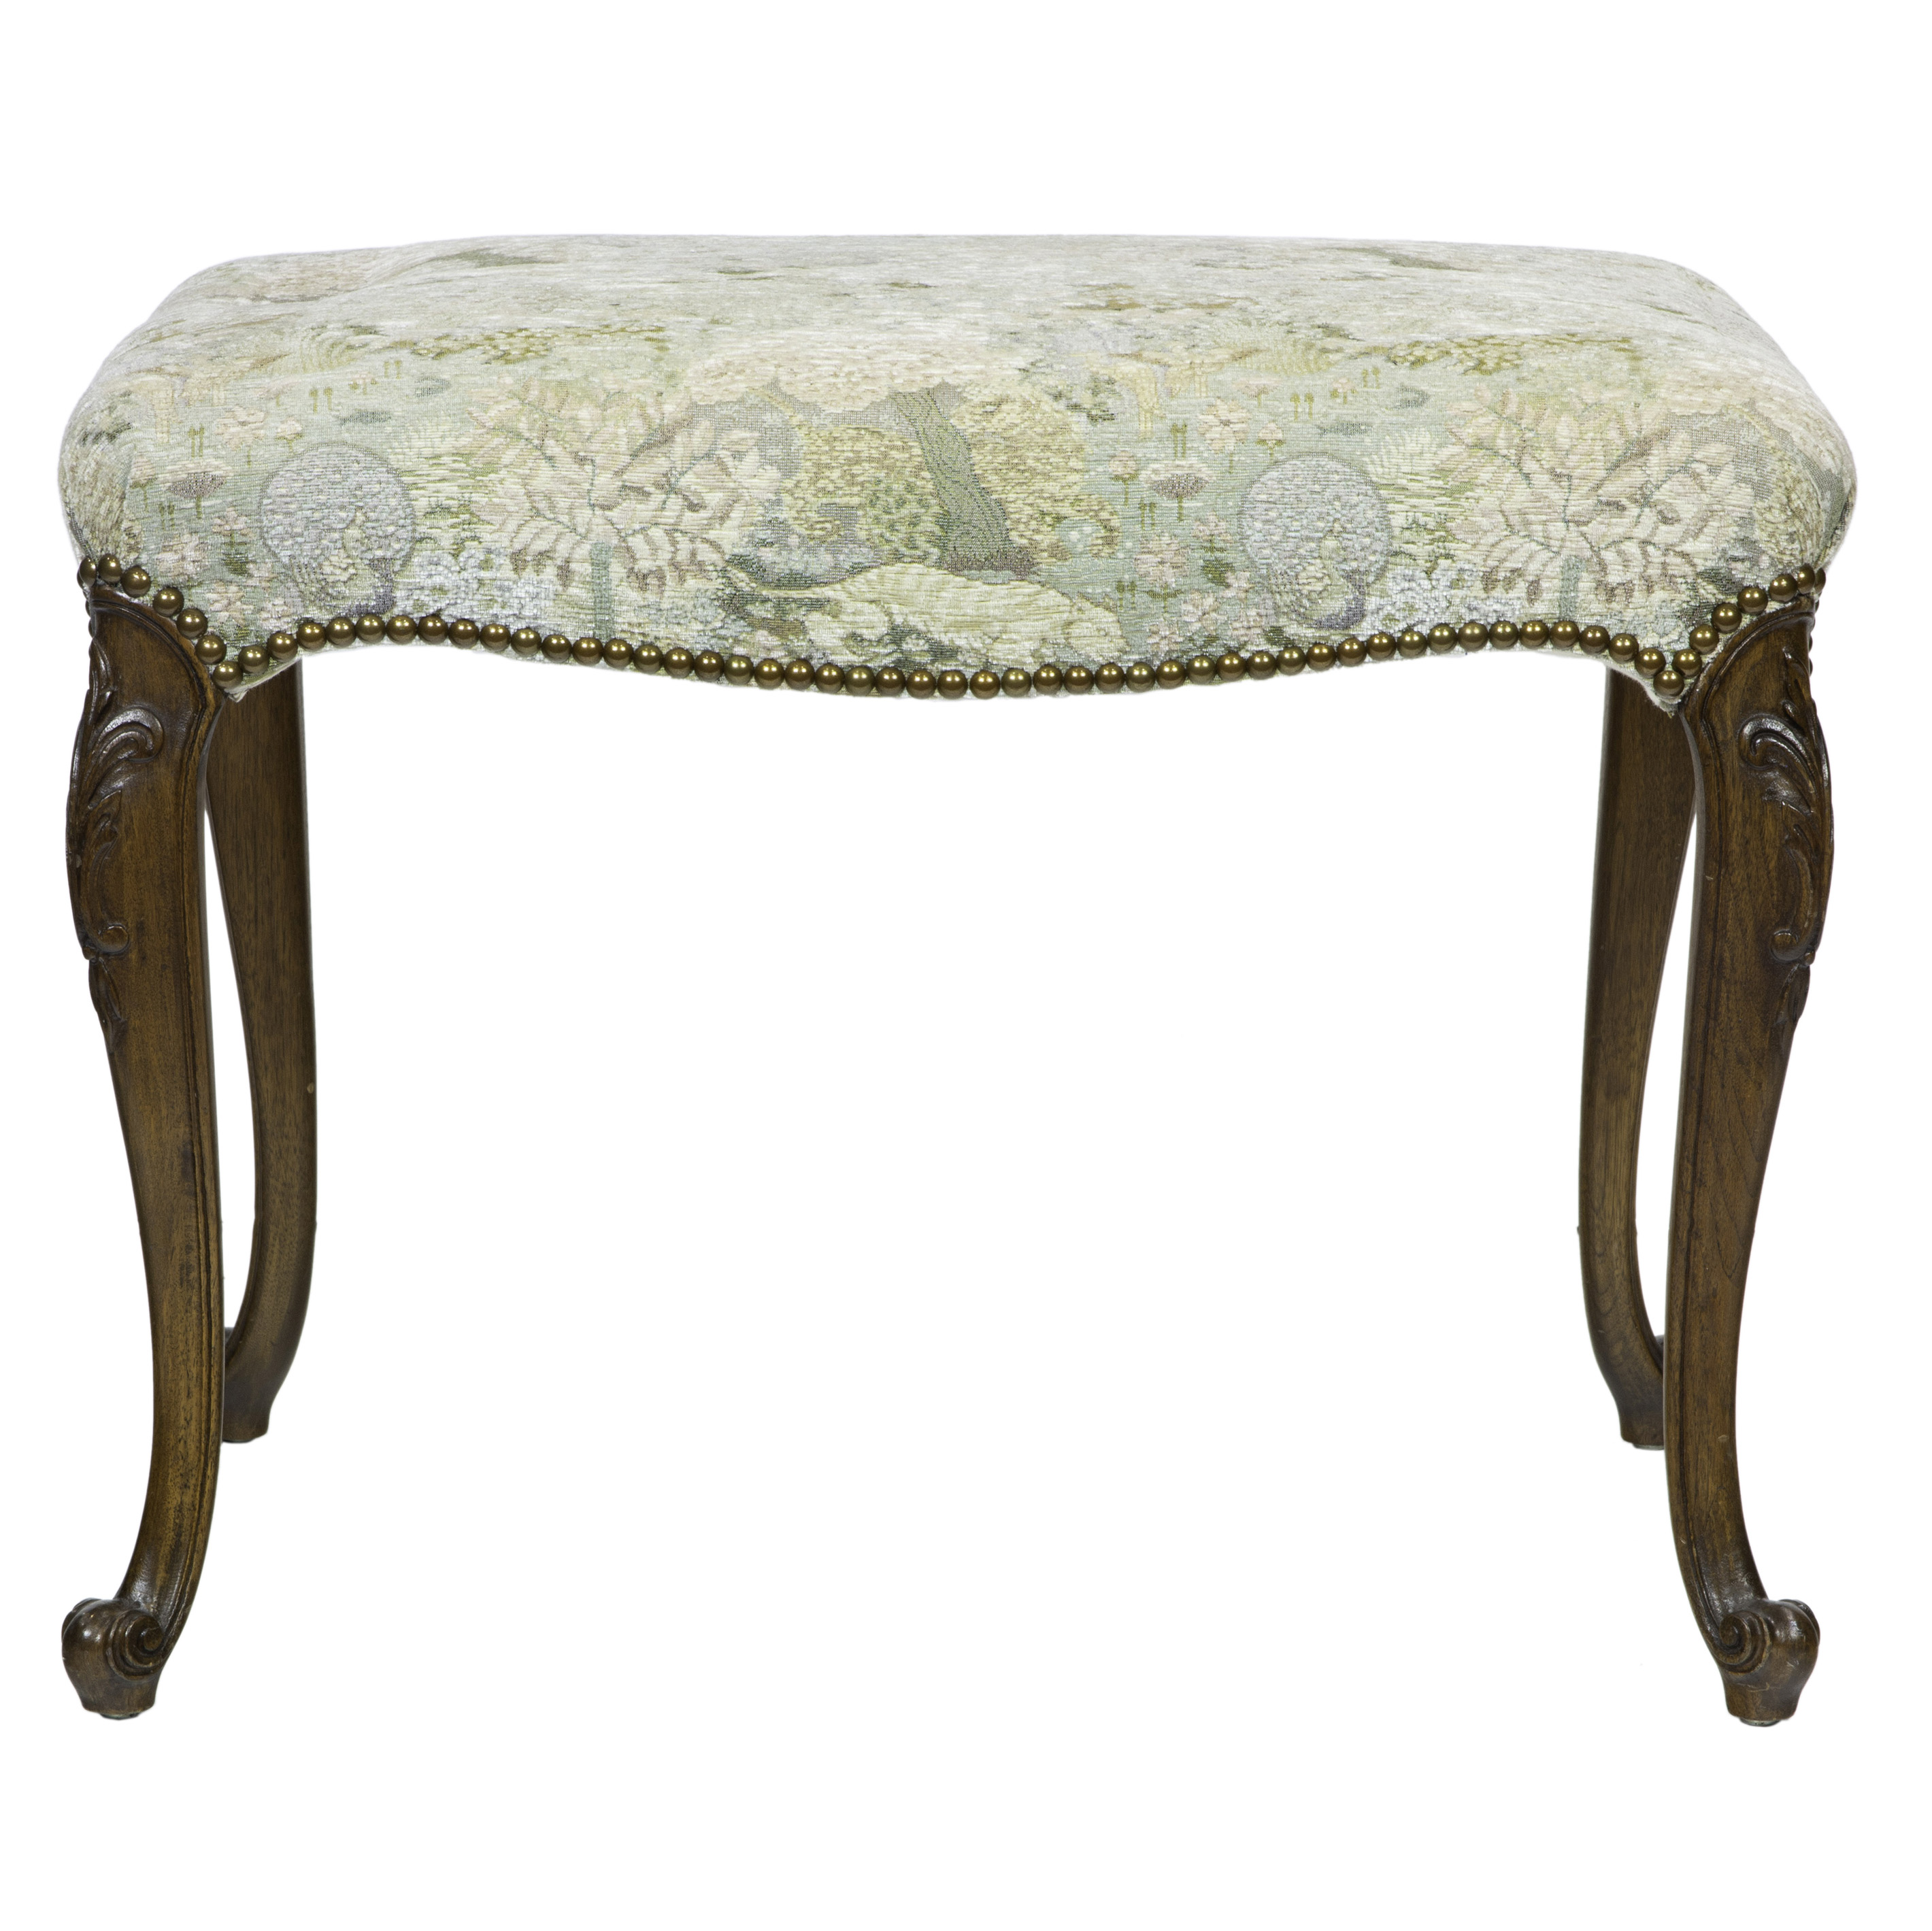 FRENCH UPHOLSTERED OTTOMAN French